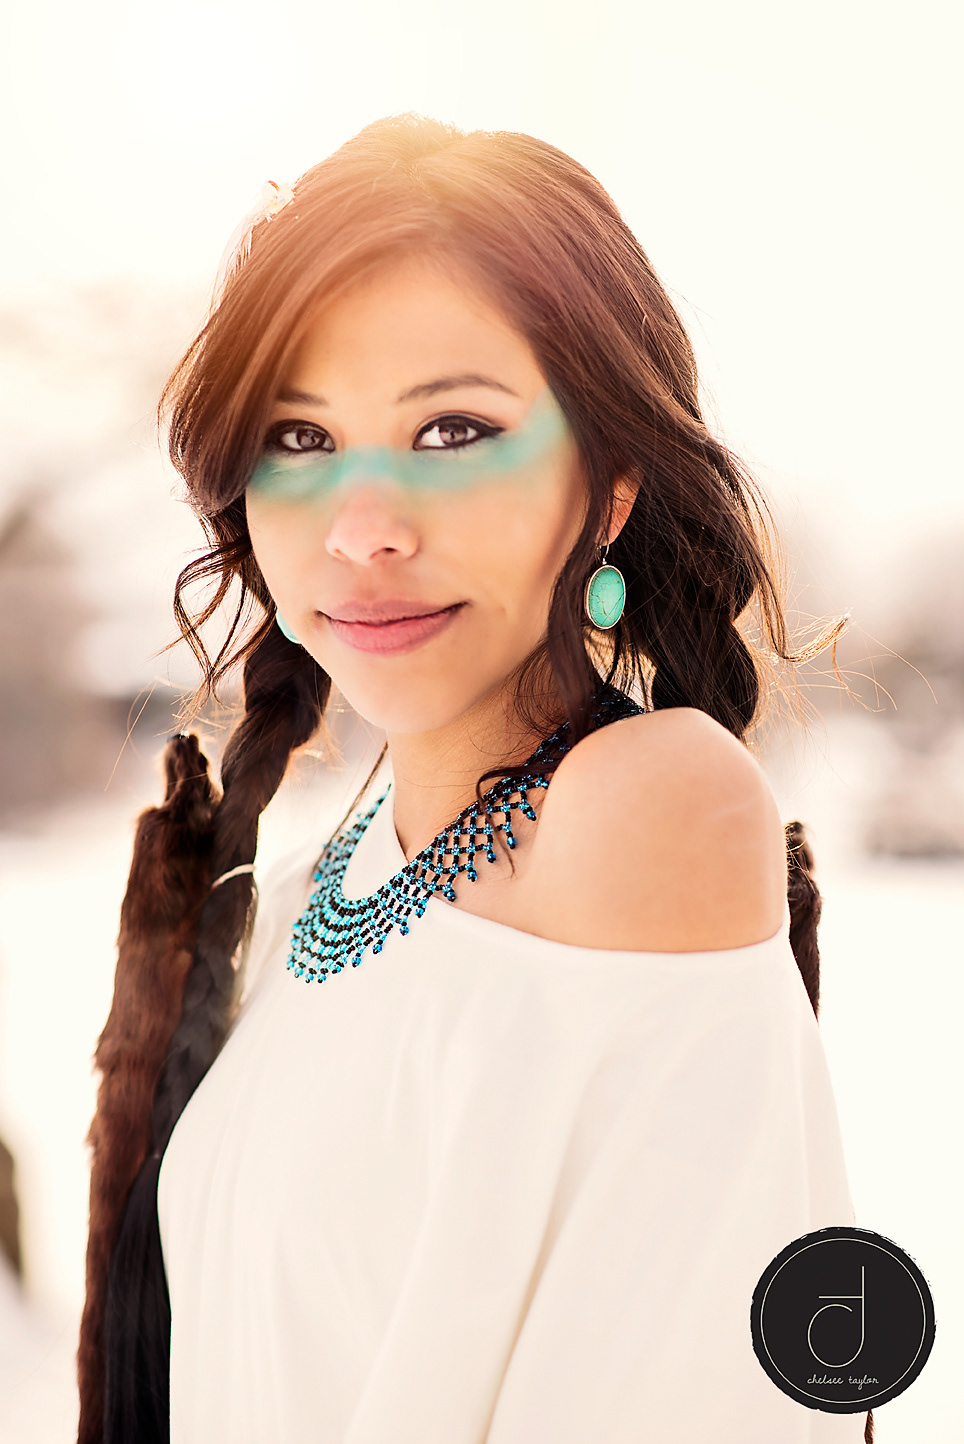 Native american chelsee taylor Beautiful brunette blue feather smile sexy winter Canada